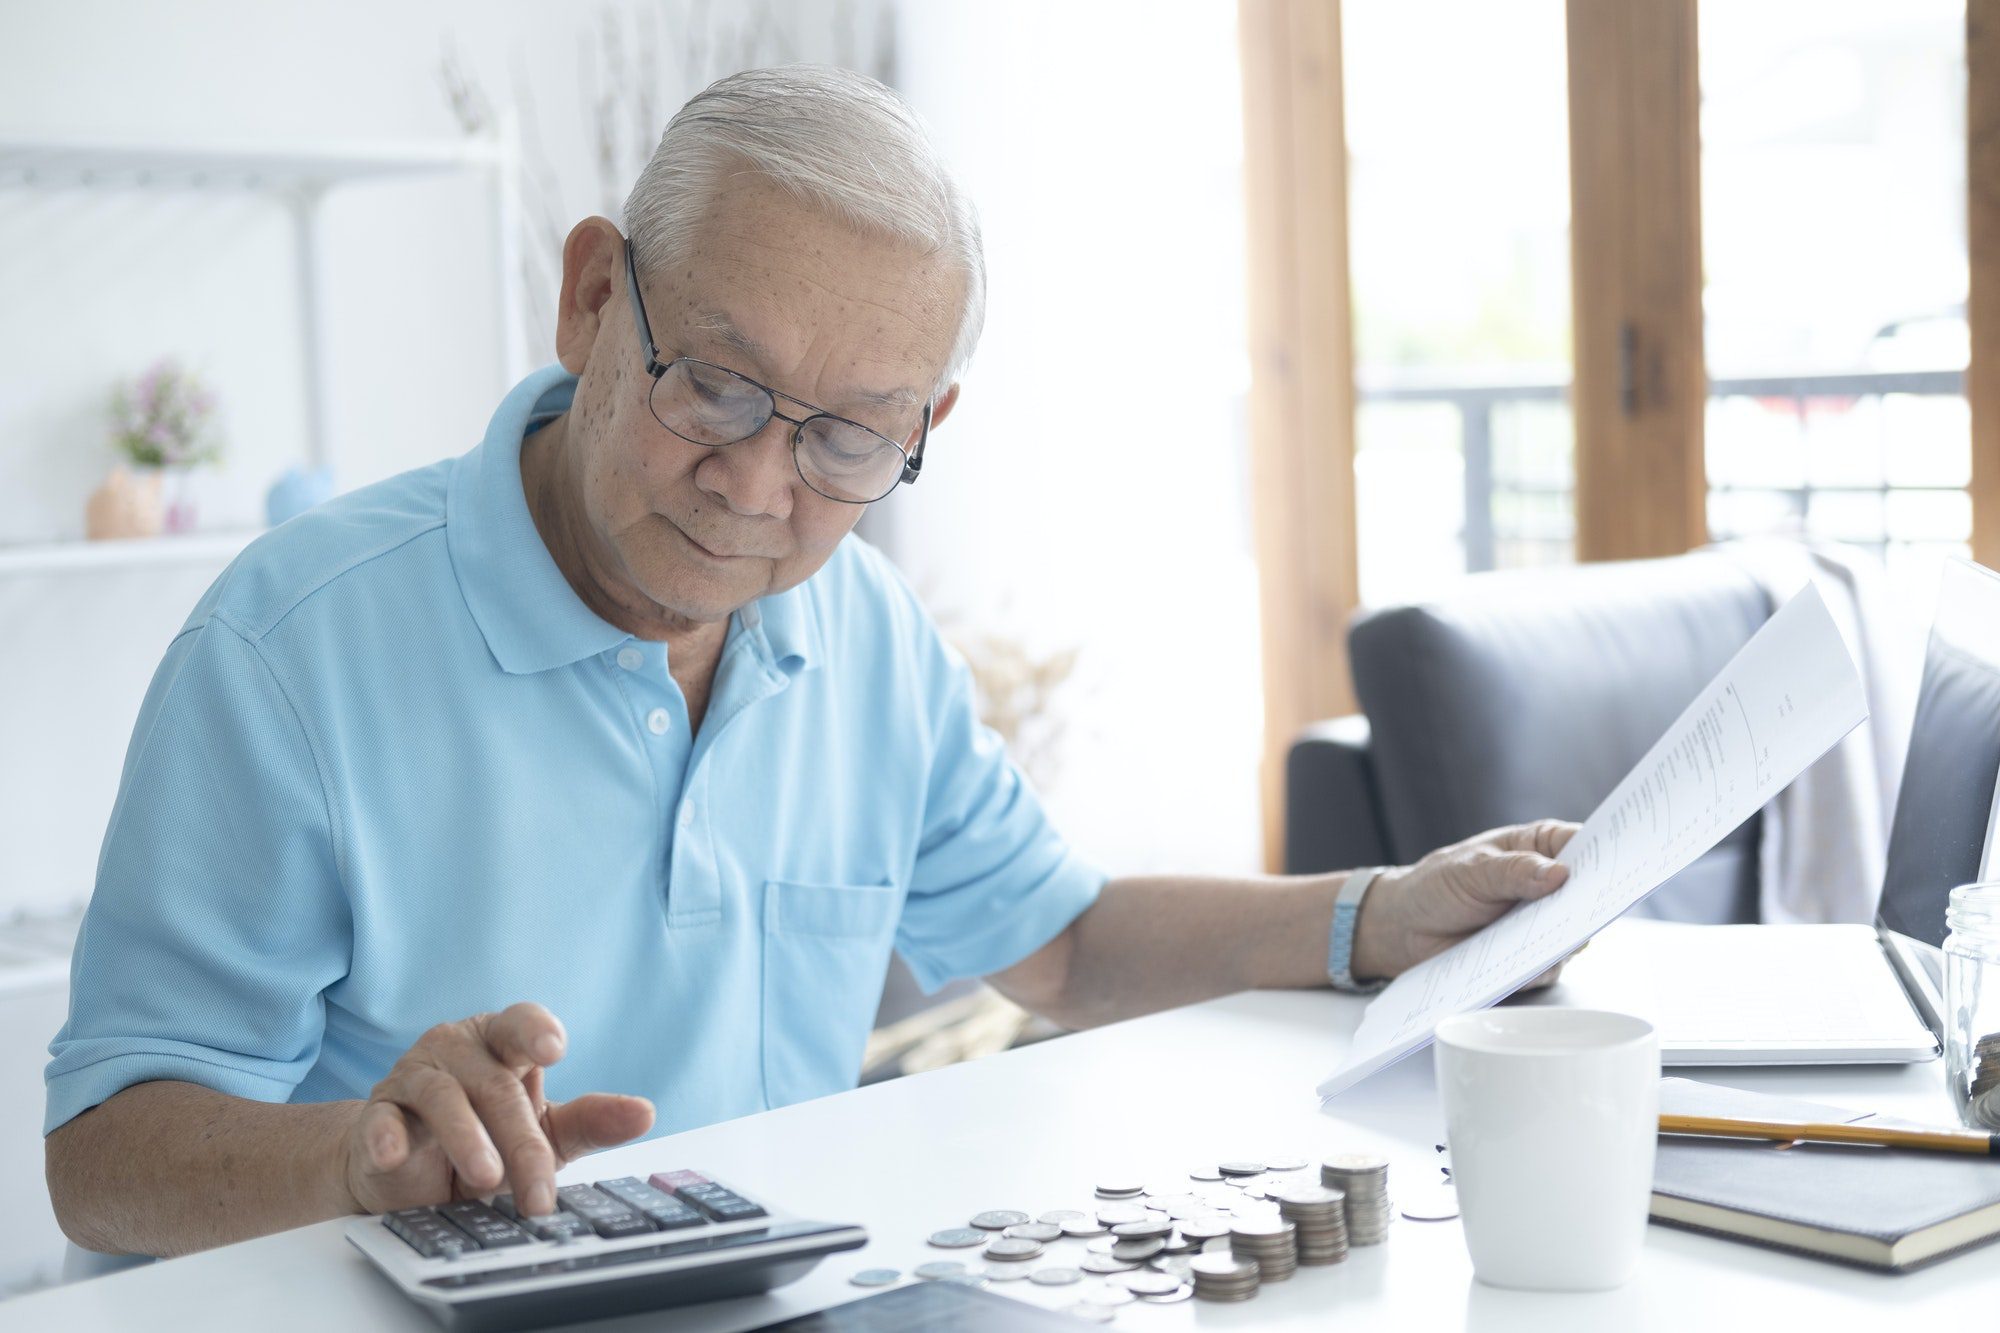 Senior man calculating how much to invest in Health Matching Account (HMA’s).